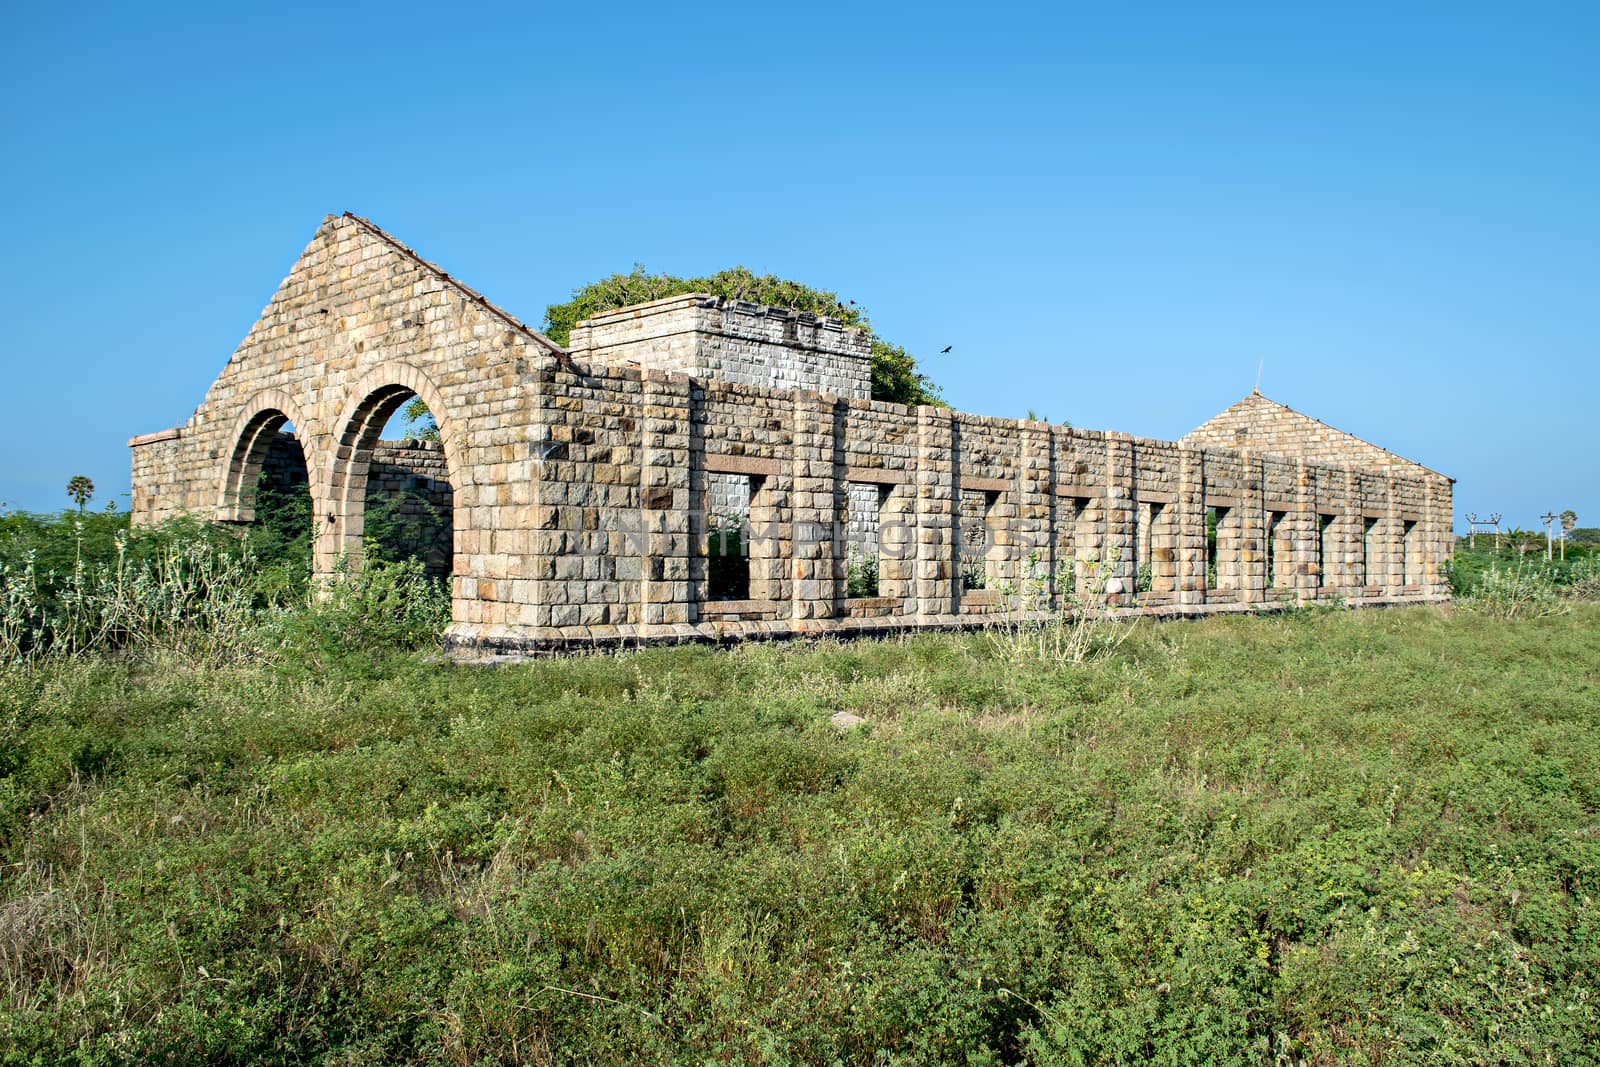 Remains of old heritage stone structure of abandoned steam locomotive shed in Mandapam,Tamil Nadu,India.